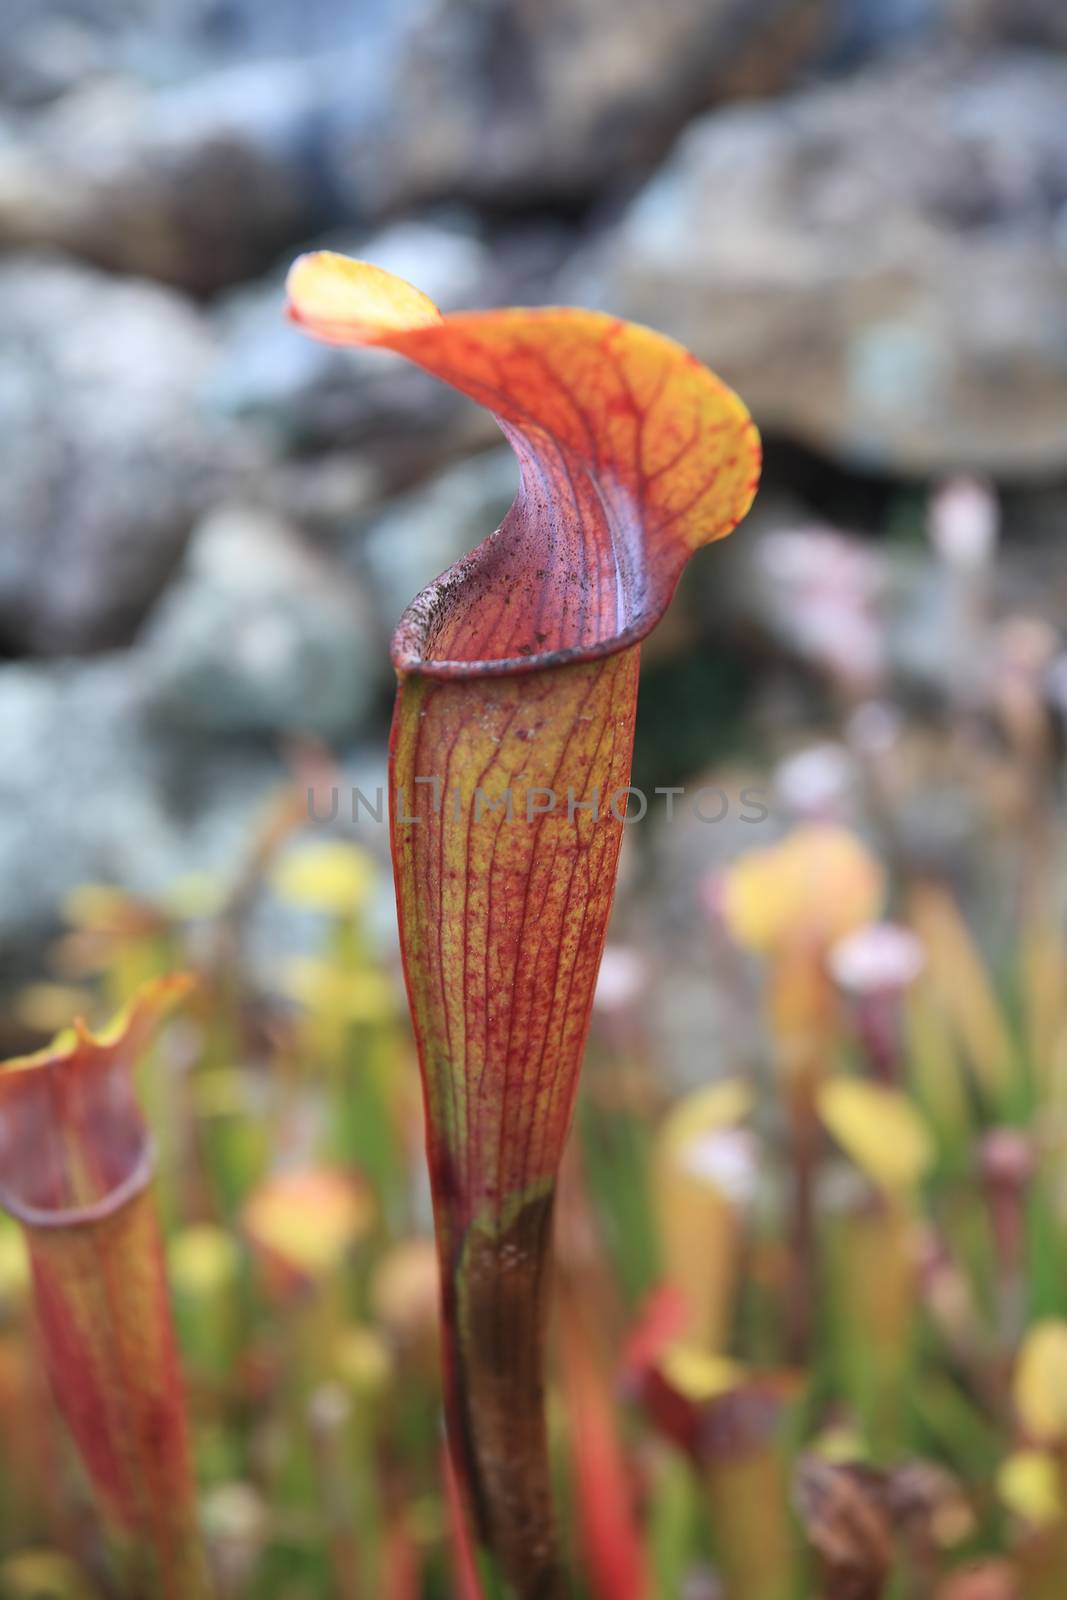 The trumpet pitcher is a carnivorous plant, its red veins attract mosquitios and other insects to it. The leaves form tall,  gracefully curved funnels, and have a  lid.   Shallow dof to blur background.